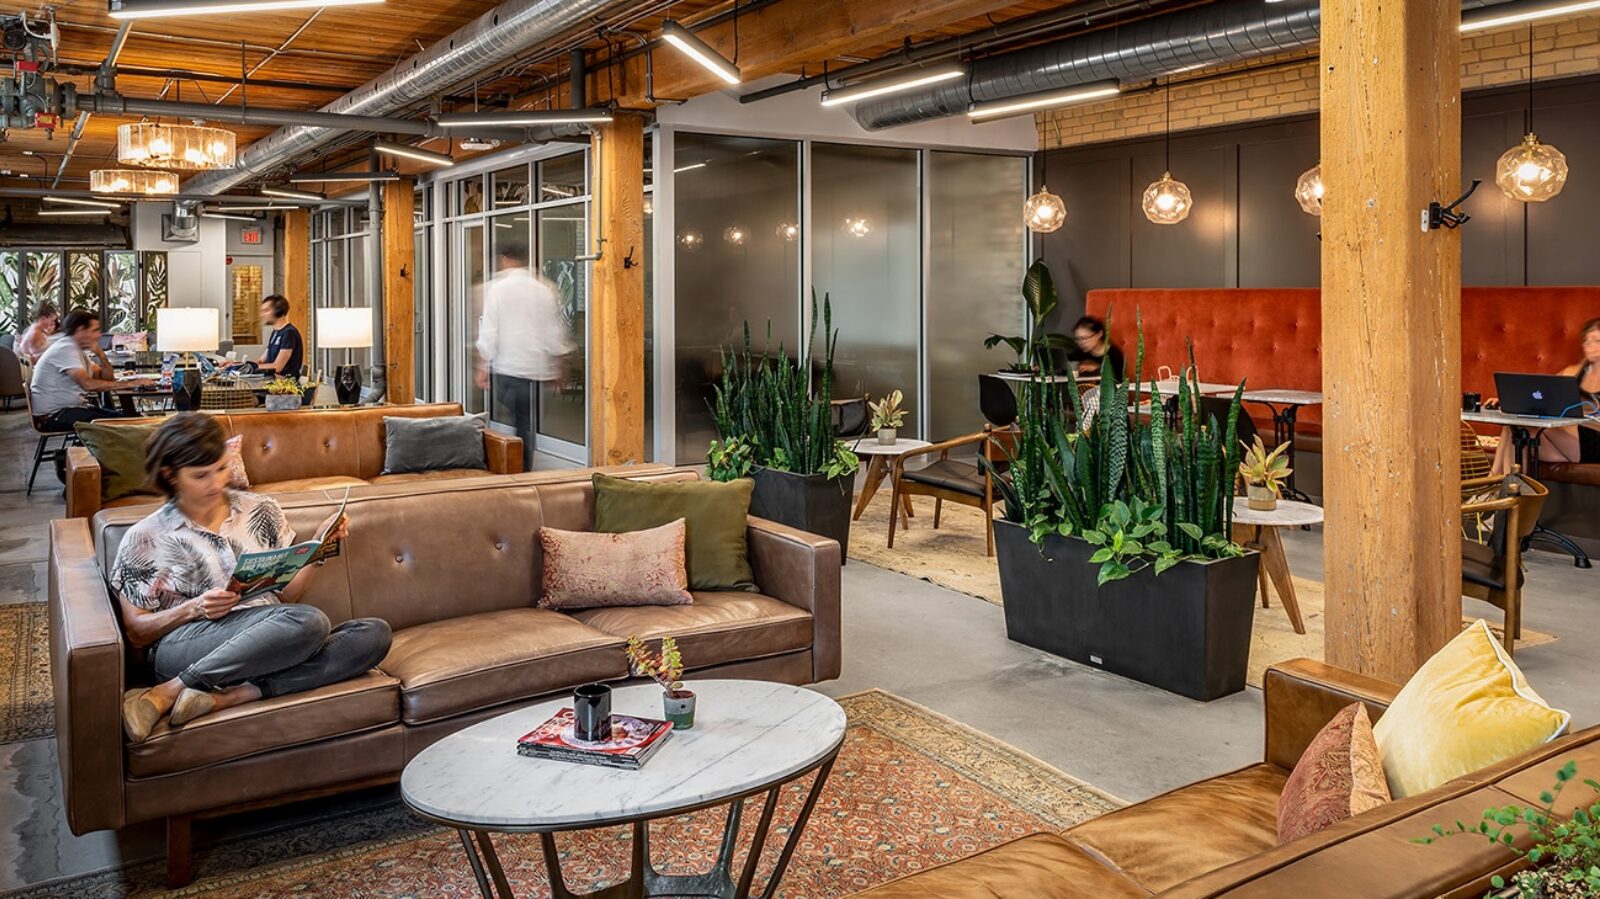 Who Rents Office & Coworking Spaces?